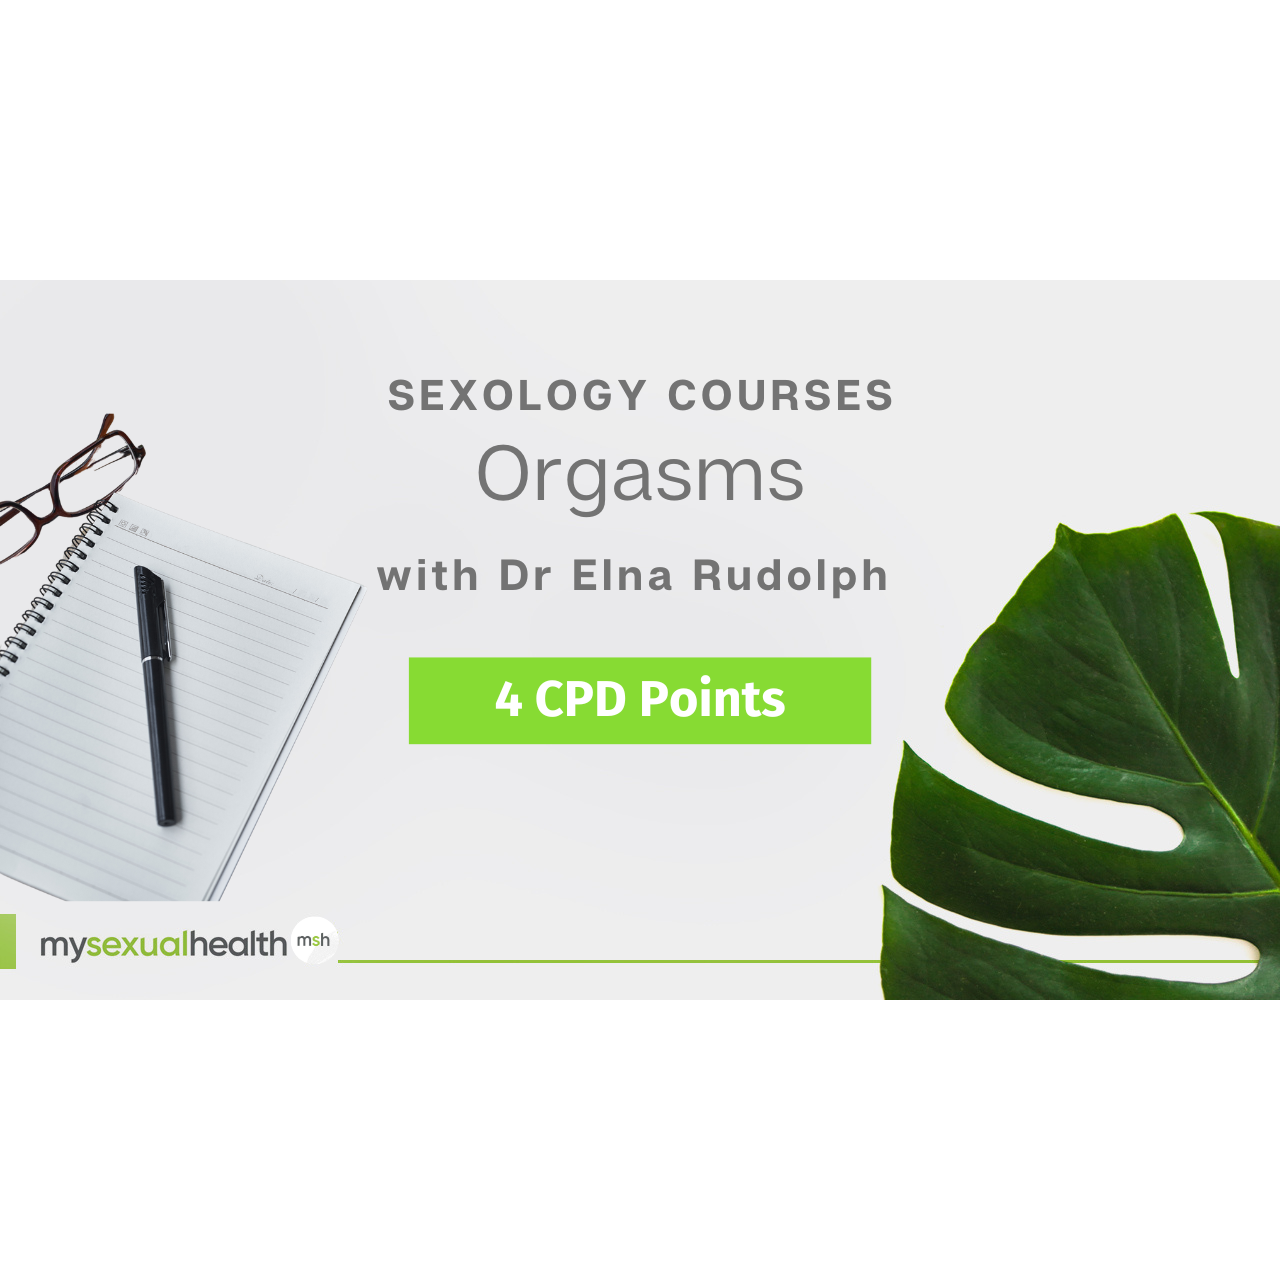 Orgasms by Dr Elna Rudolph 4 CPD Points